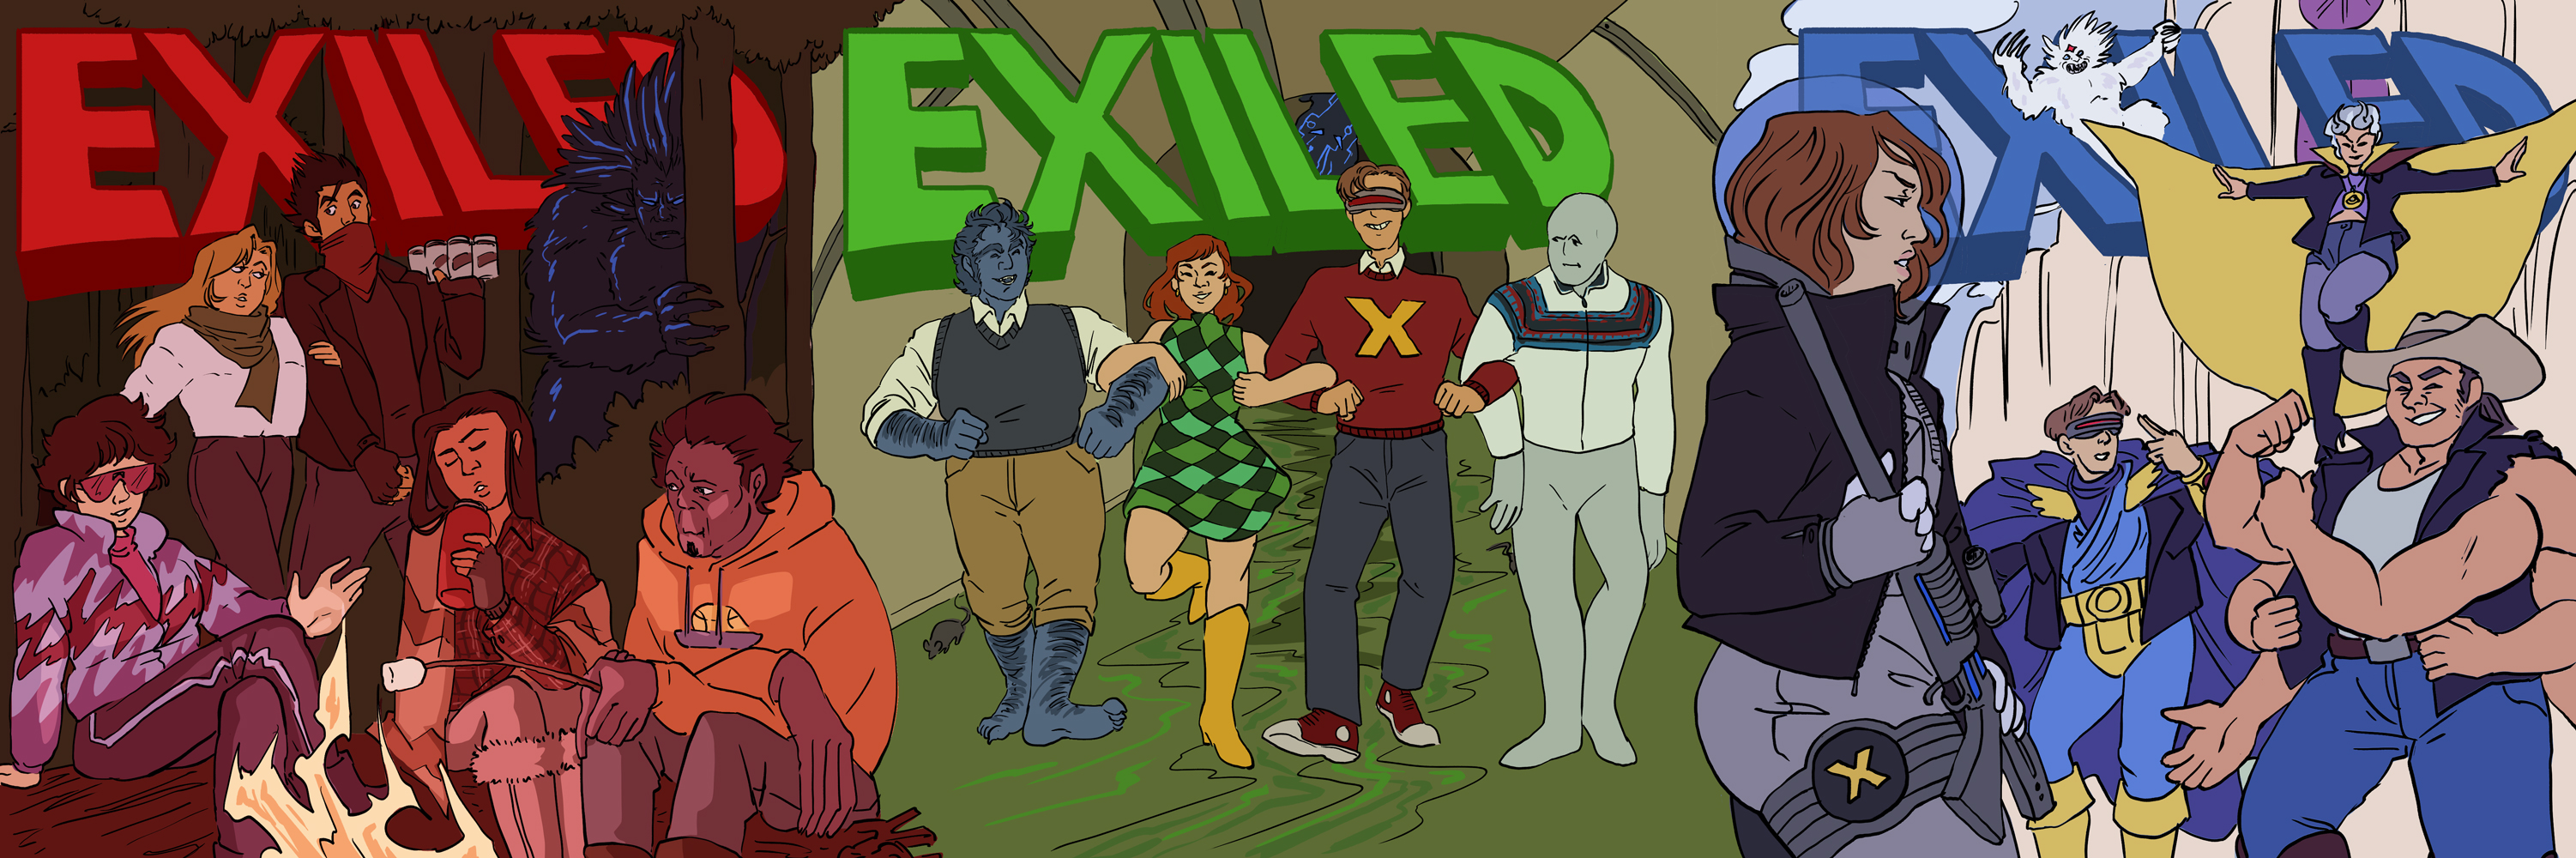 Art by A. D'amico - Exiled Year One Annual Covers